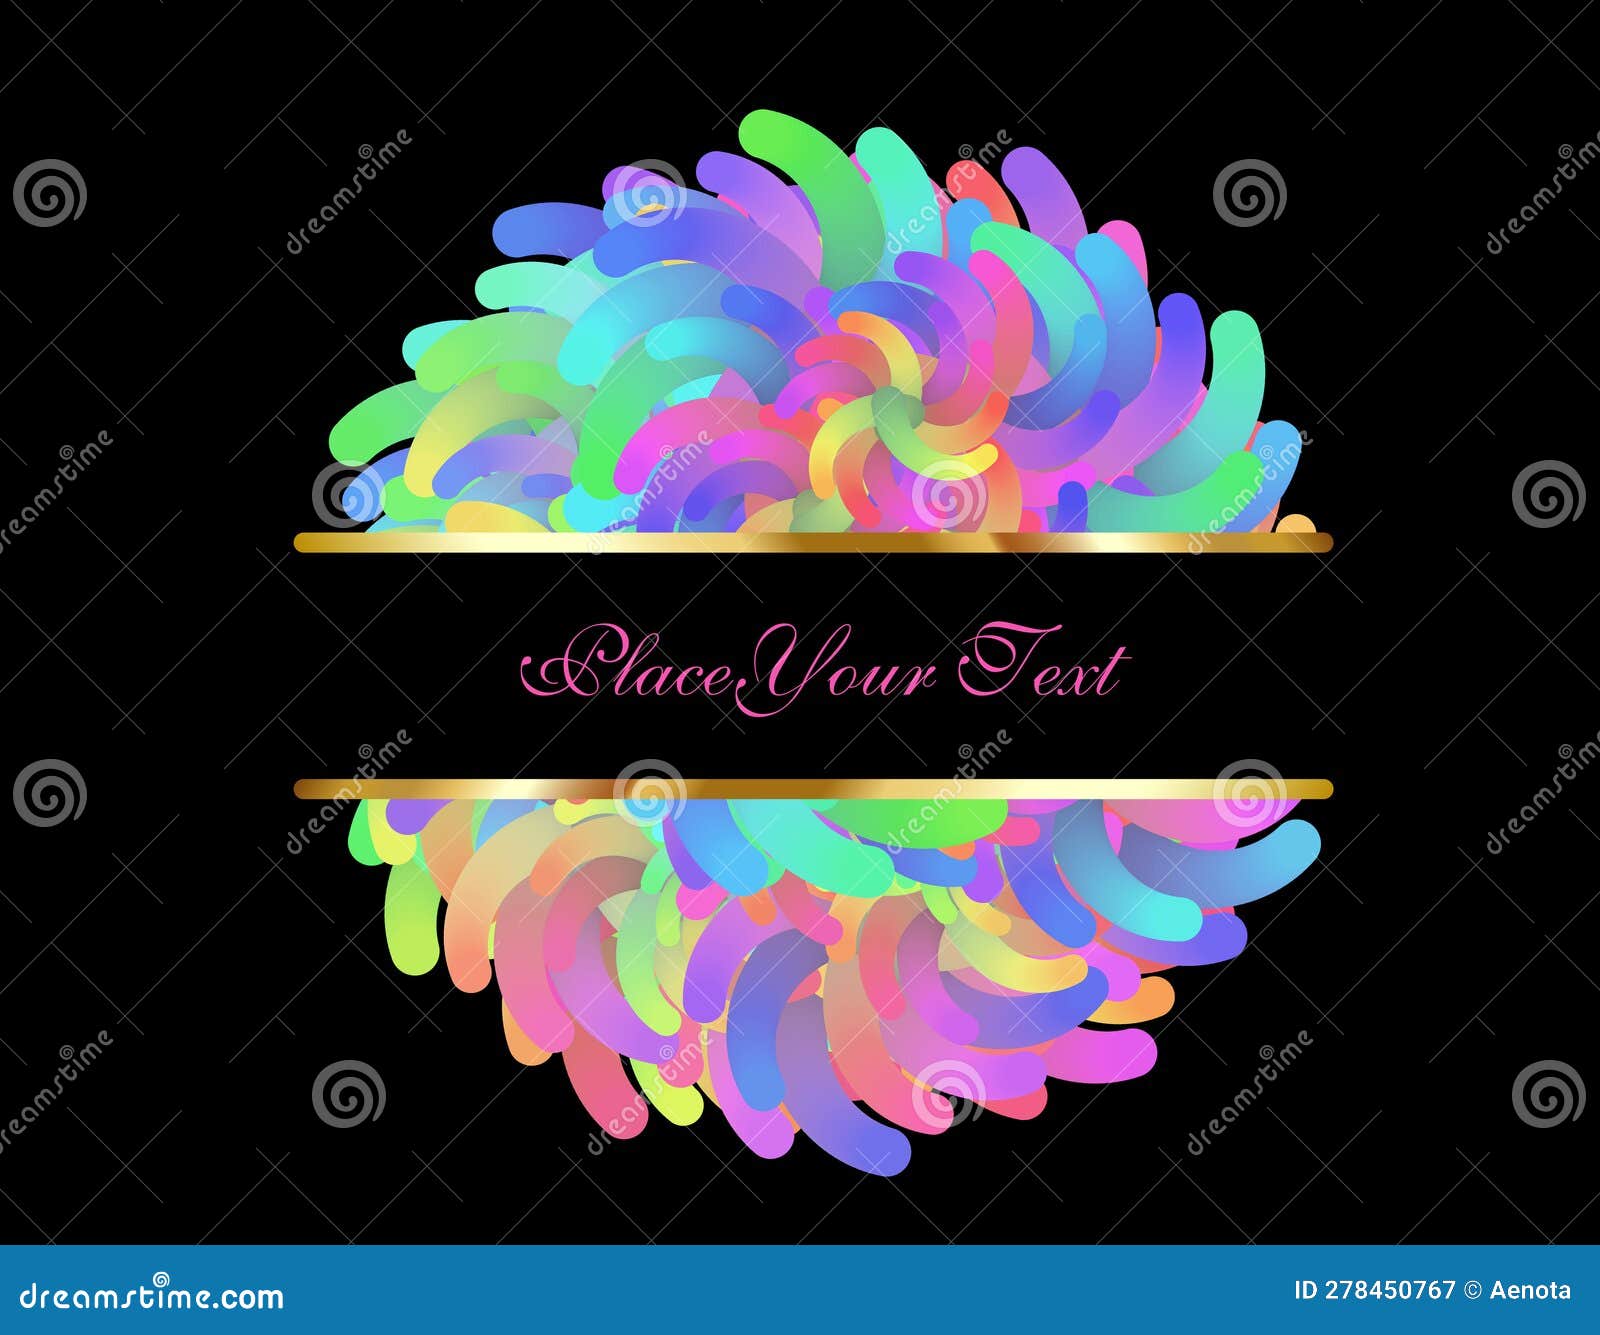  versicolor hologram clew background abstract feathery versicolored 